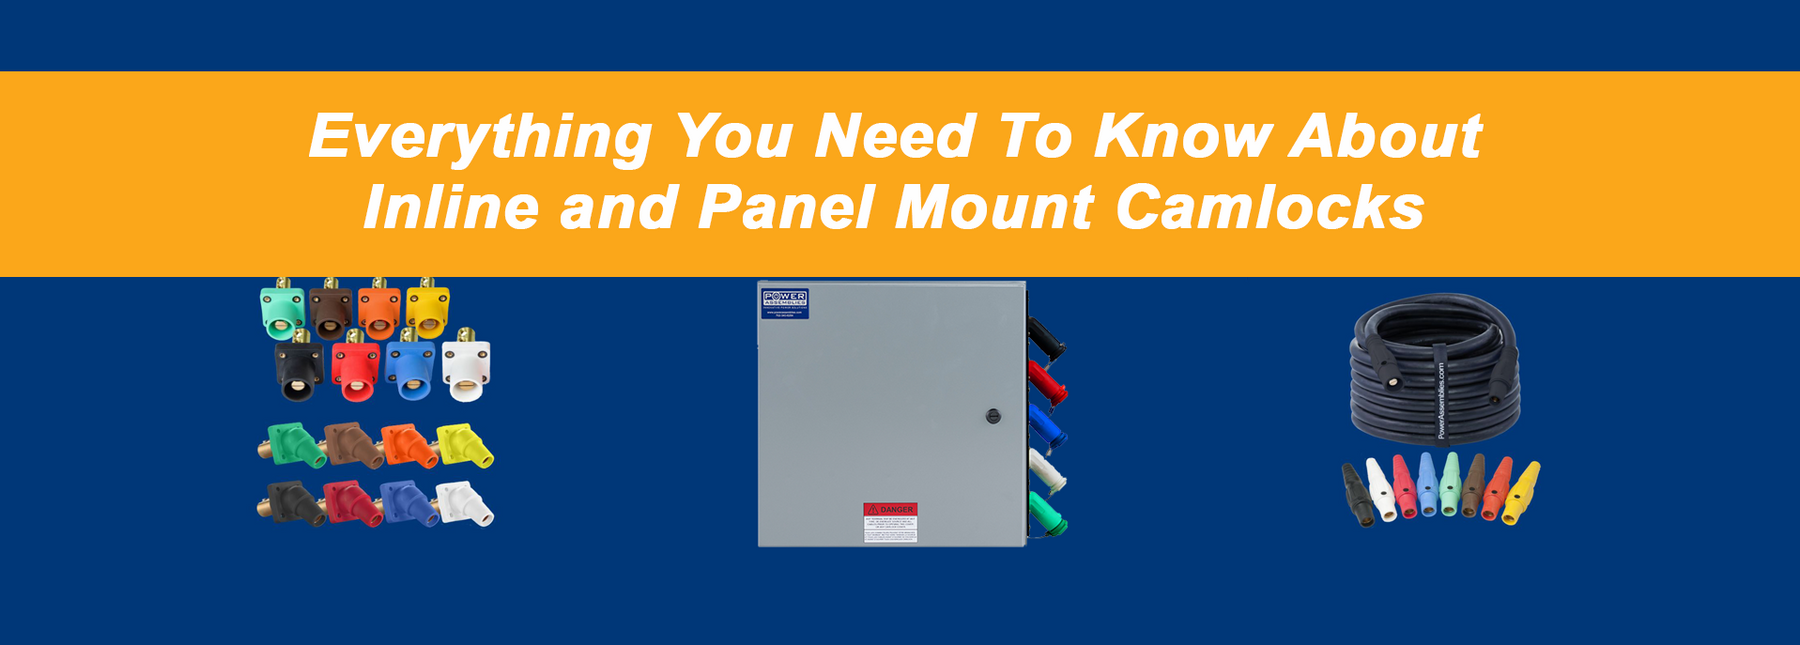 Everything You Need to Know About Inline and Panel Mount Camlocks